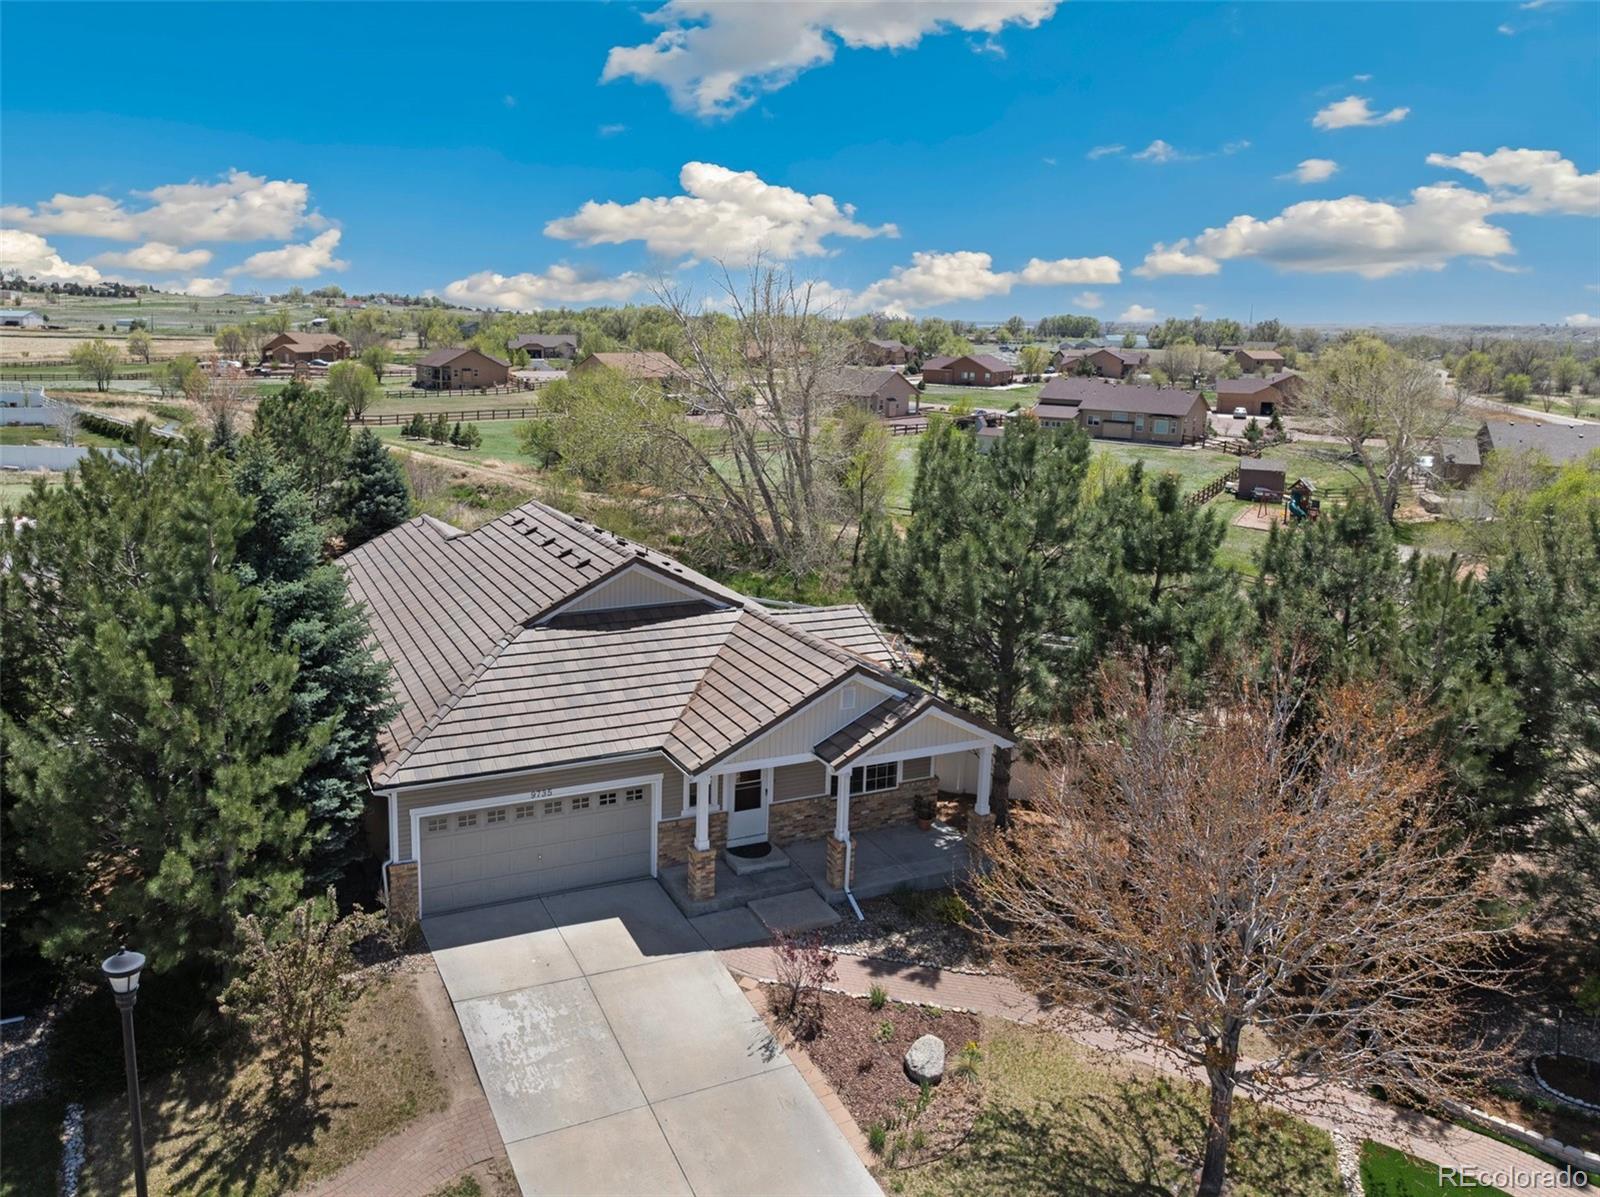 Report Image for 9735  Fireside Court,Fountain, Colorado